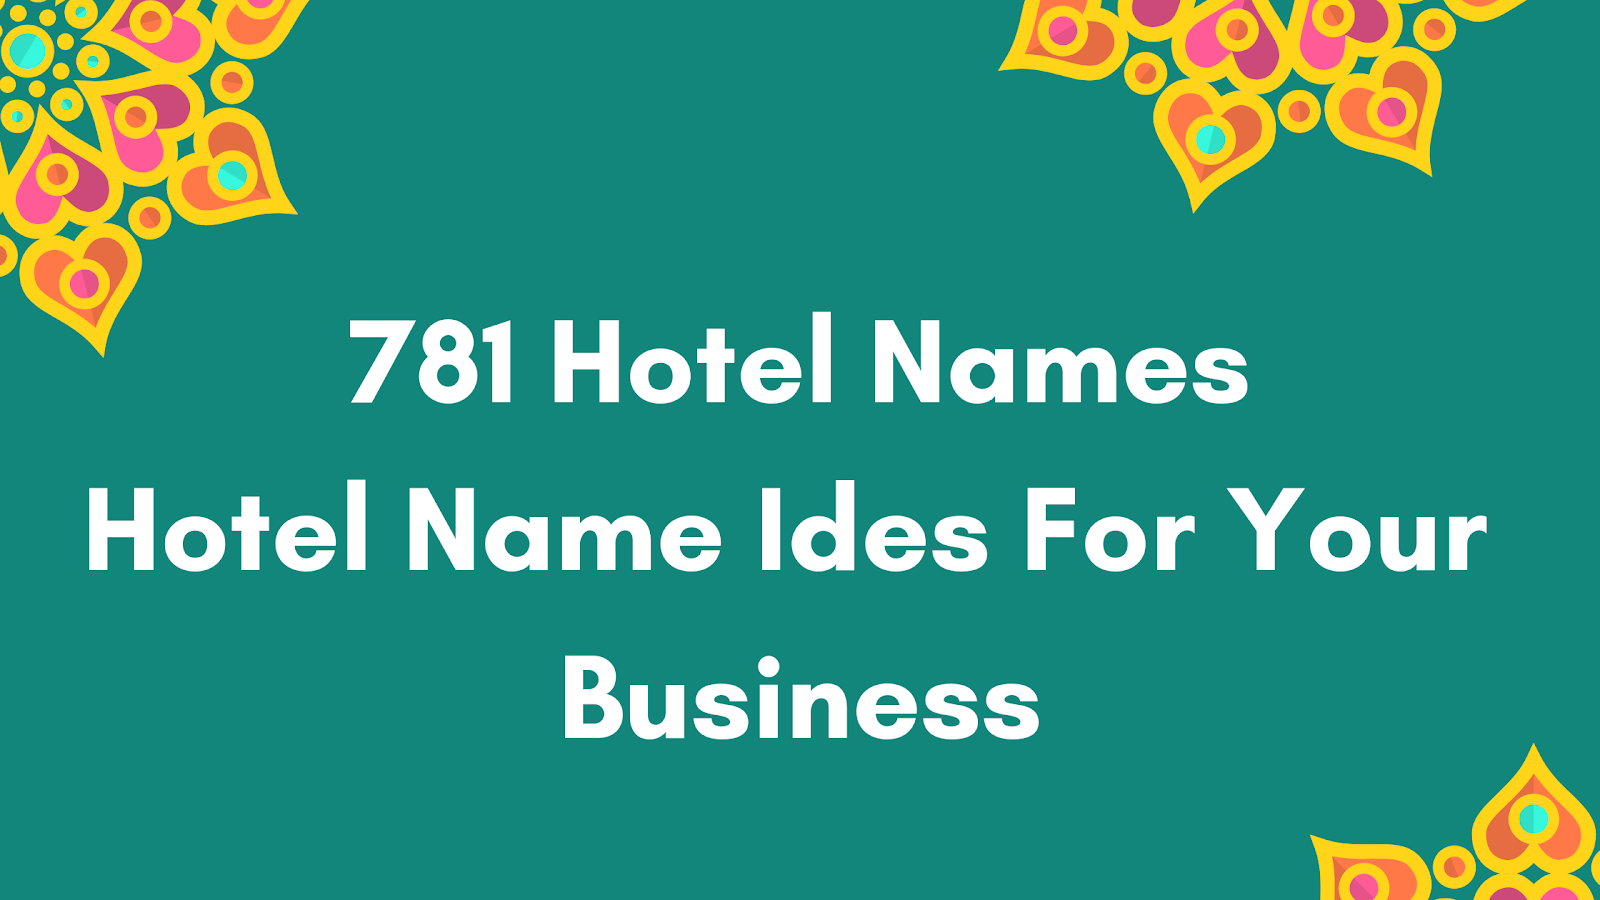 781 Hotel Names : Hotel Name Ideas For Your Buisiness